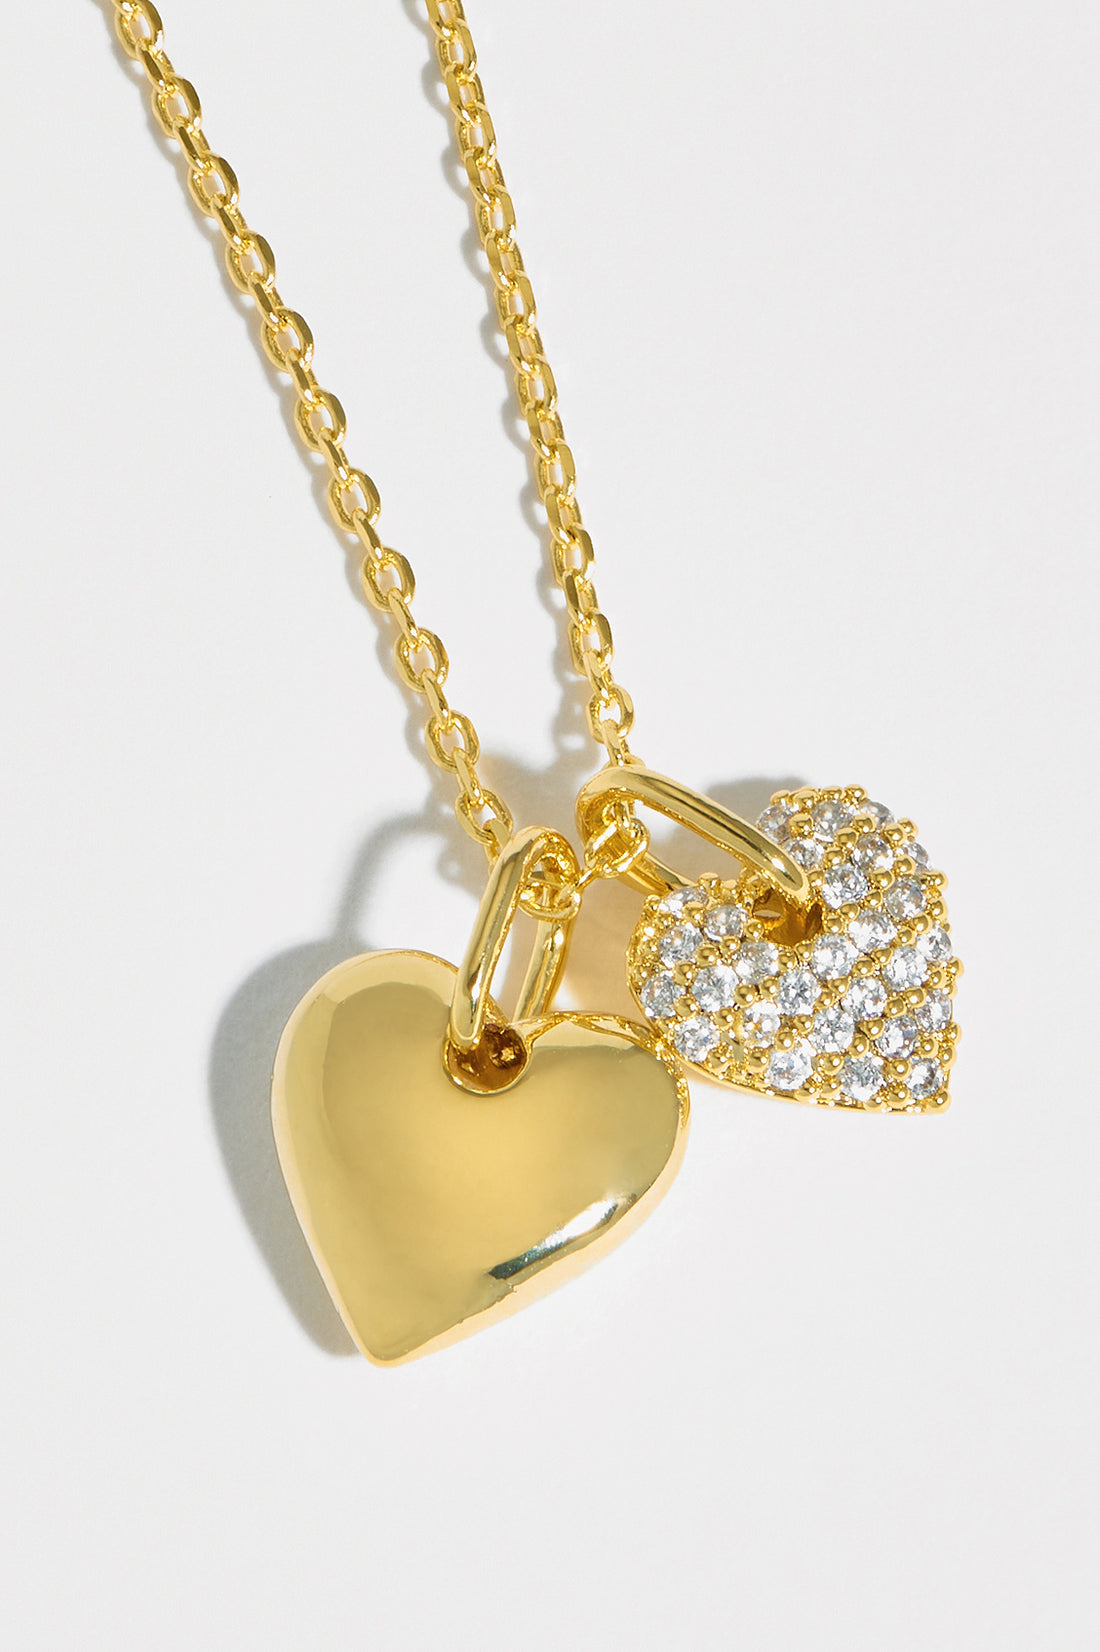 Pave Double Heart Charm Necklace - Gold Plated